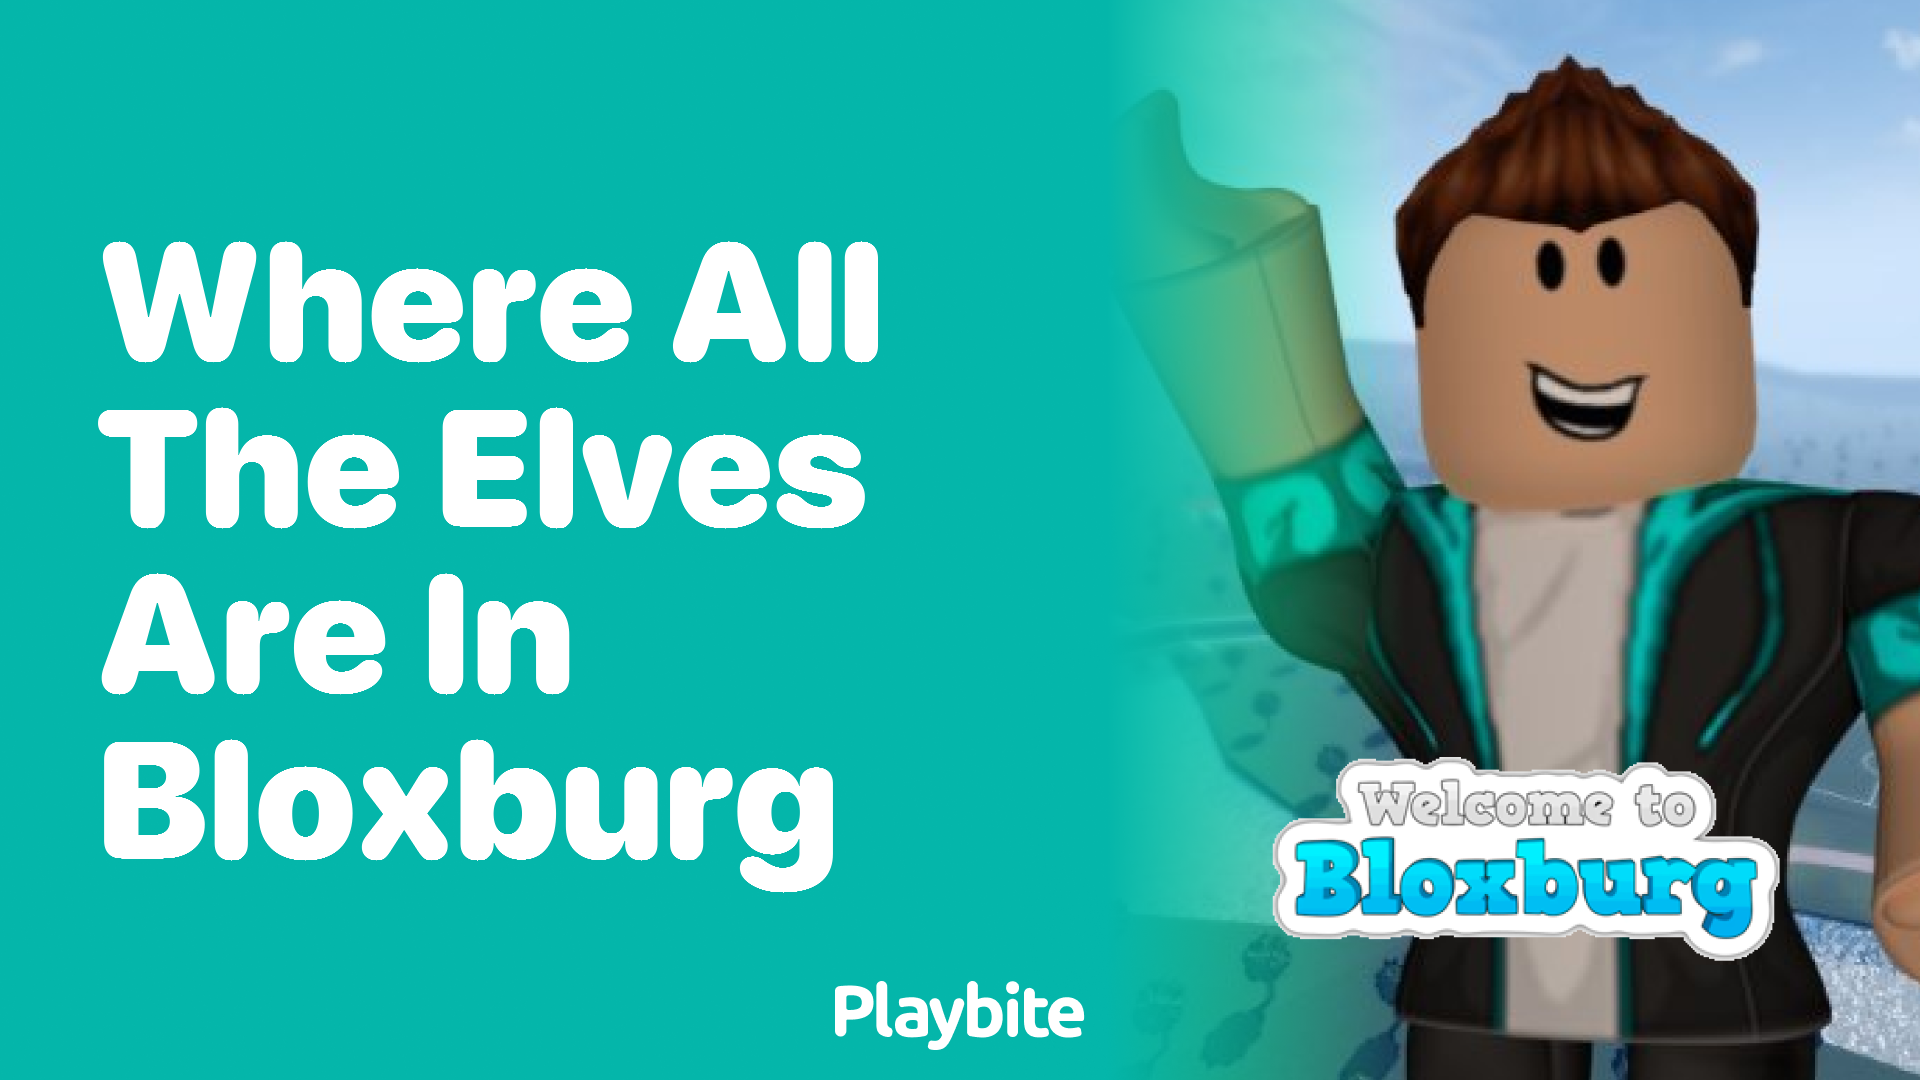 Discovering Where All the Elves Are in Bloxburg